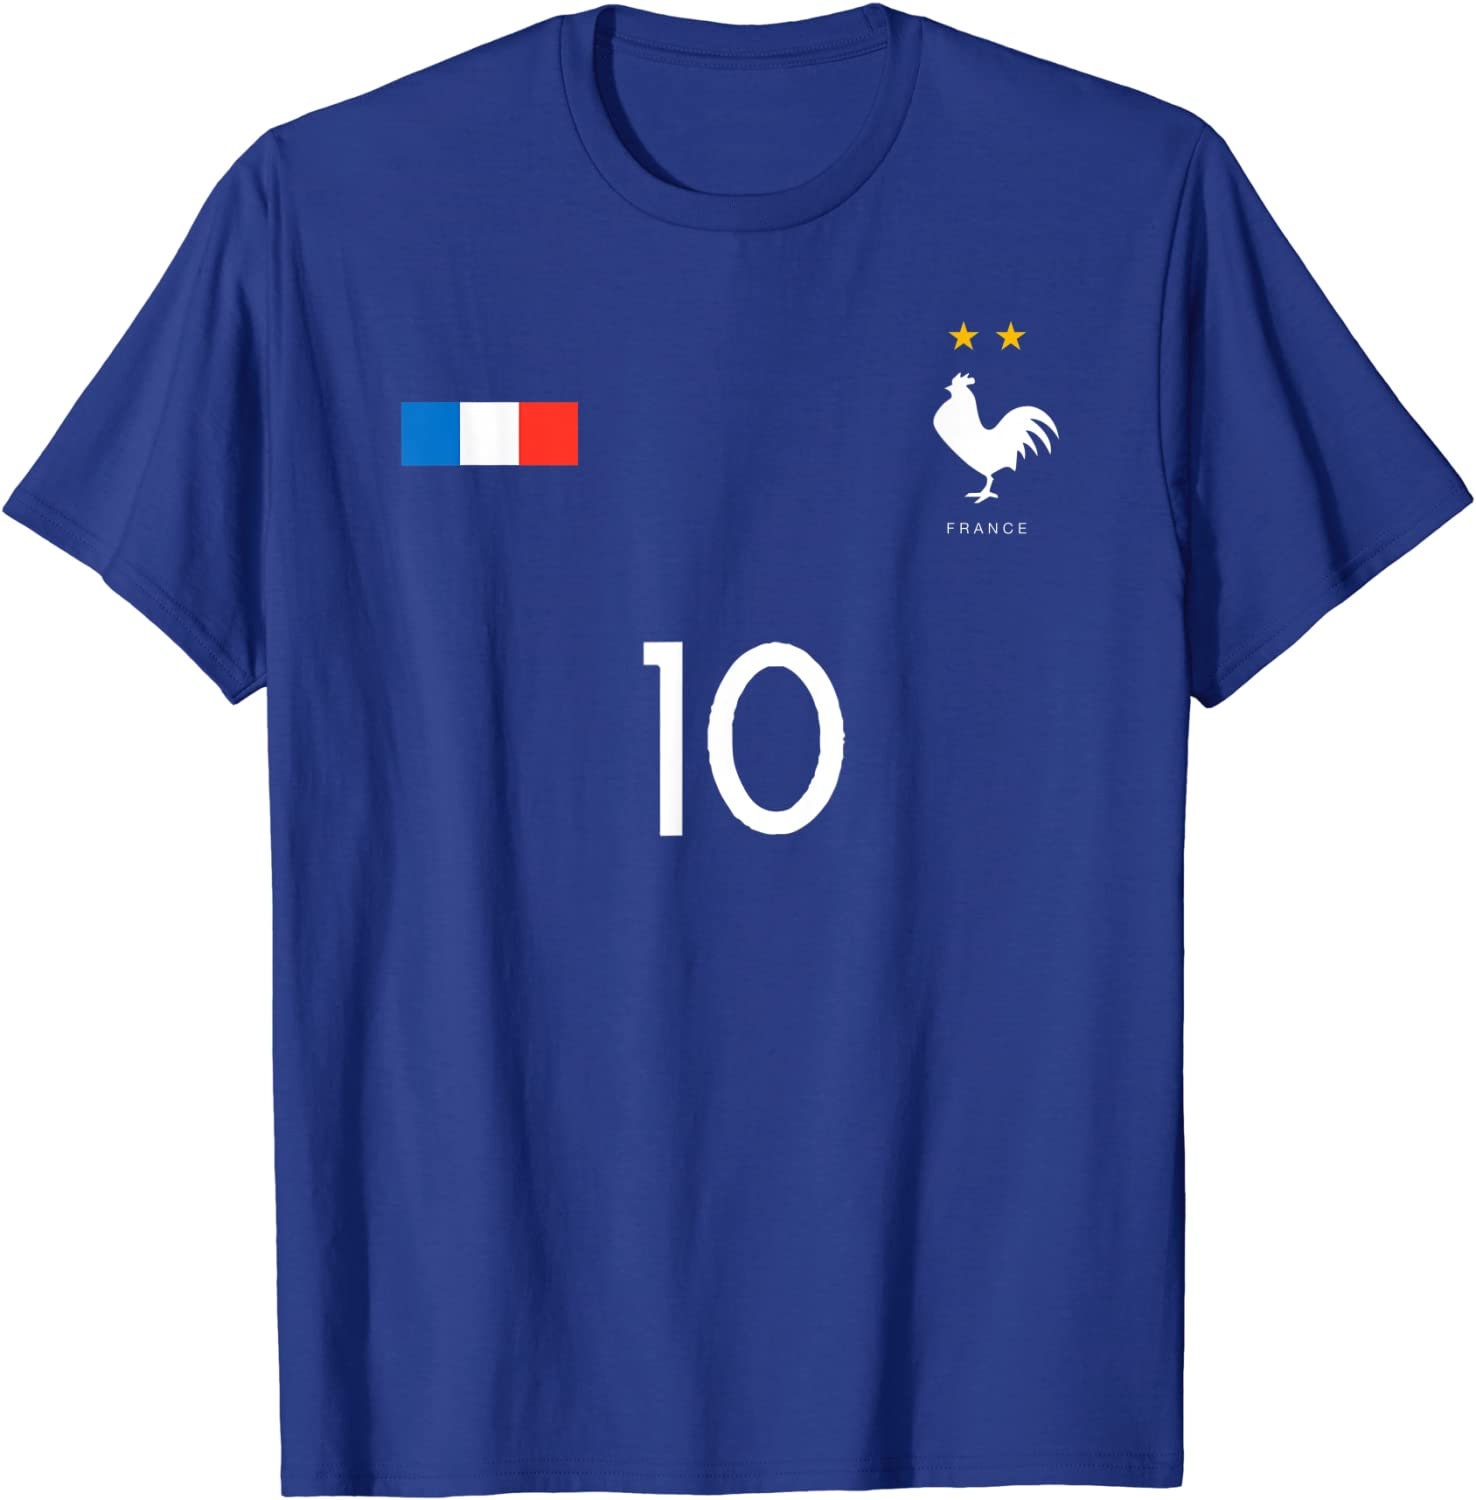 Discover France football team t-shirt with personalized number and name